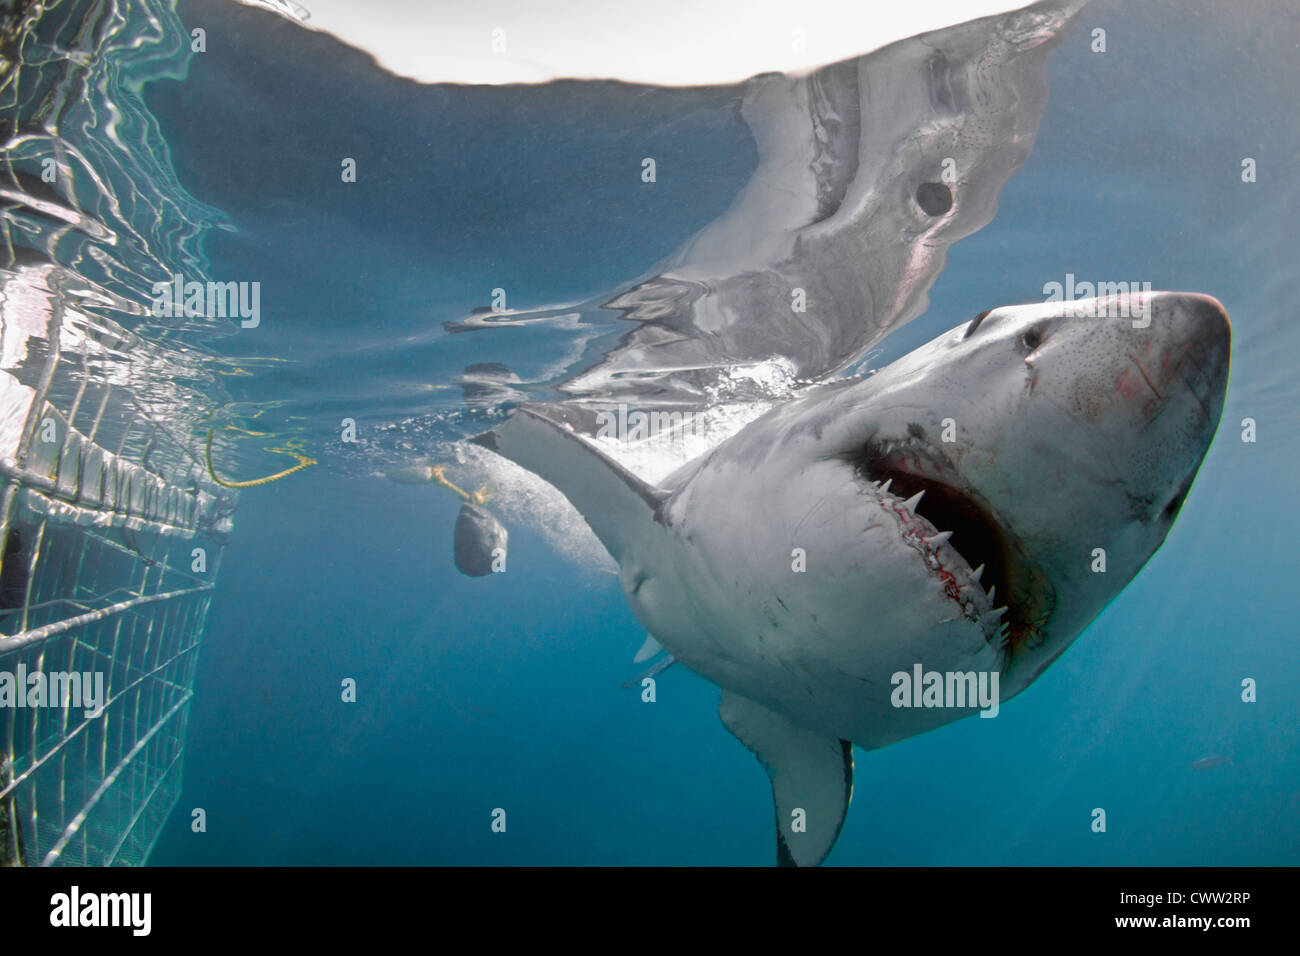 A Great White Shark passes a shark cage Stock Photo